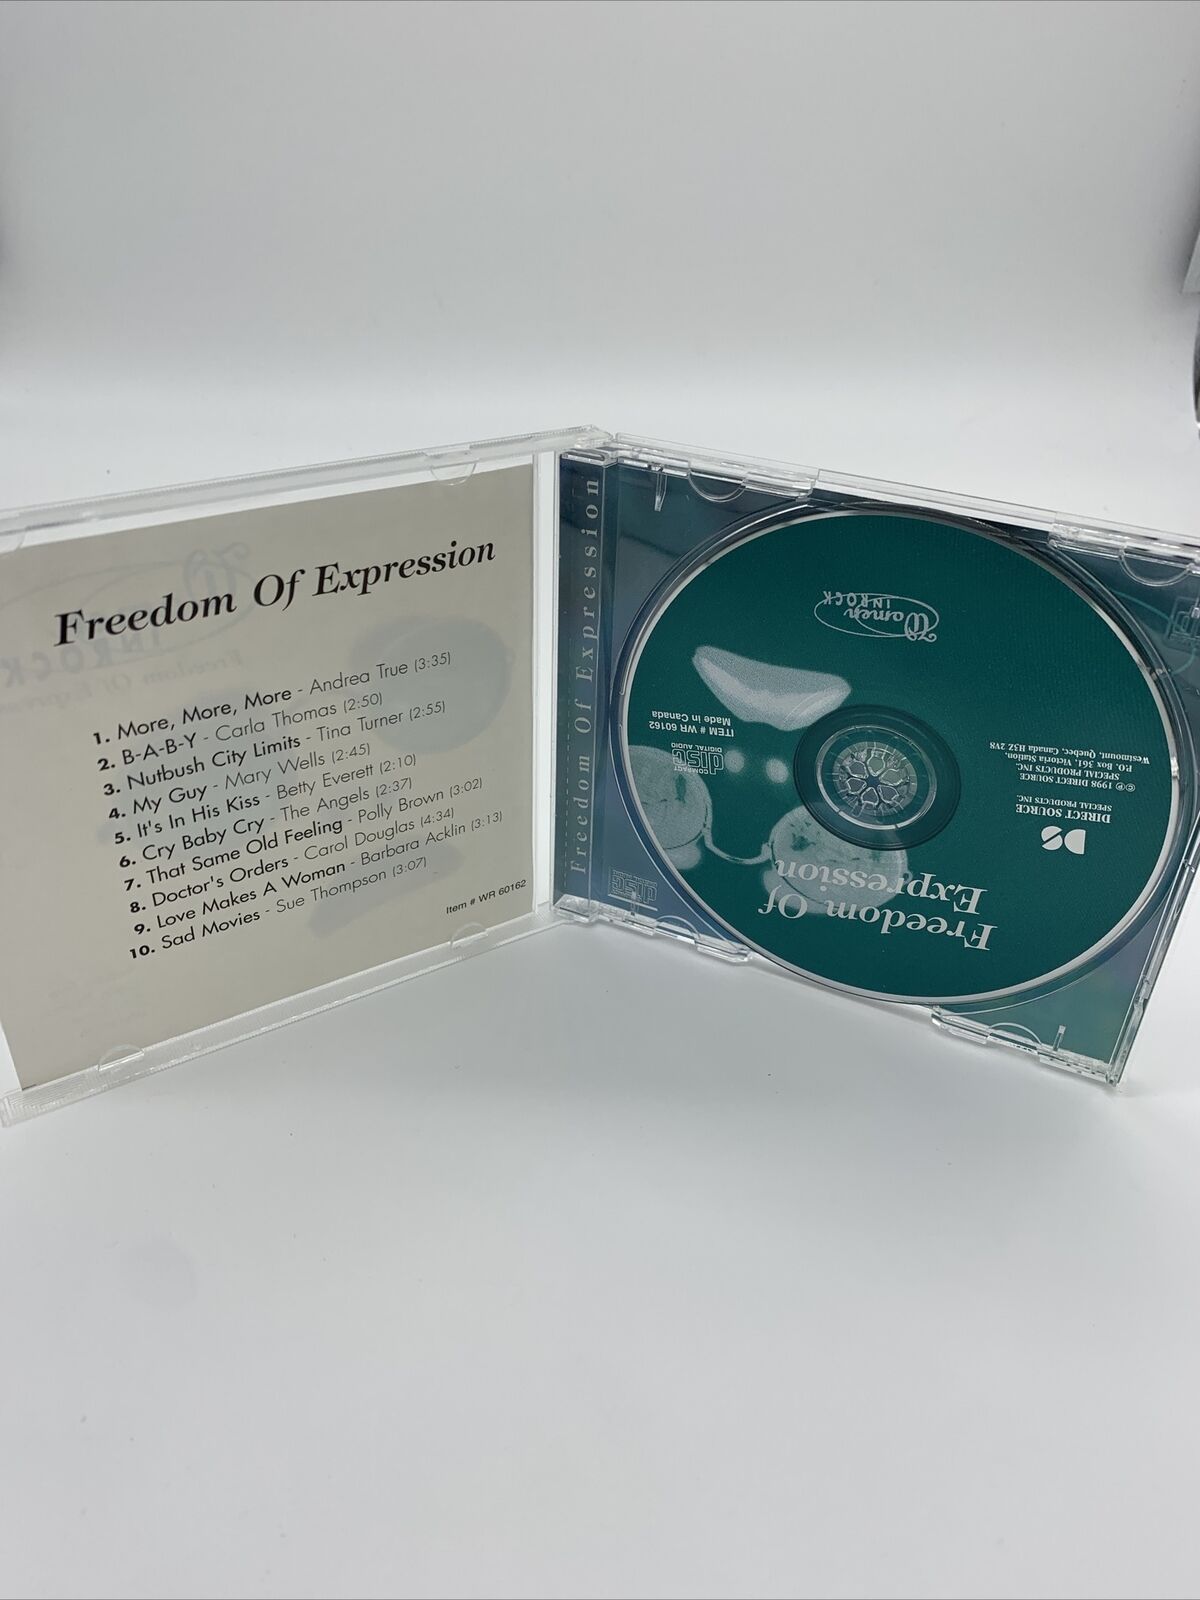 Women In Rock - Freedom Of Expression Various Artists CD